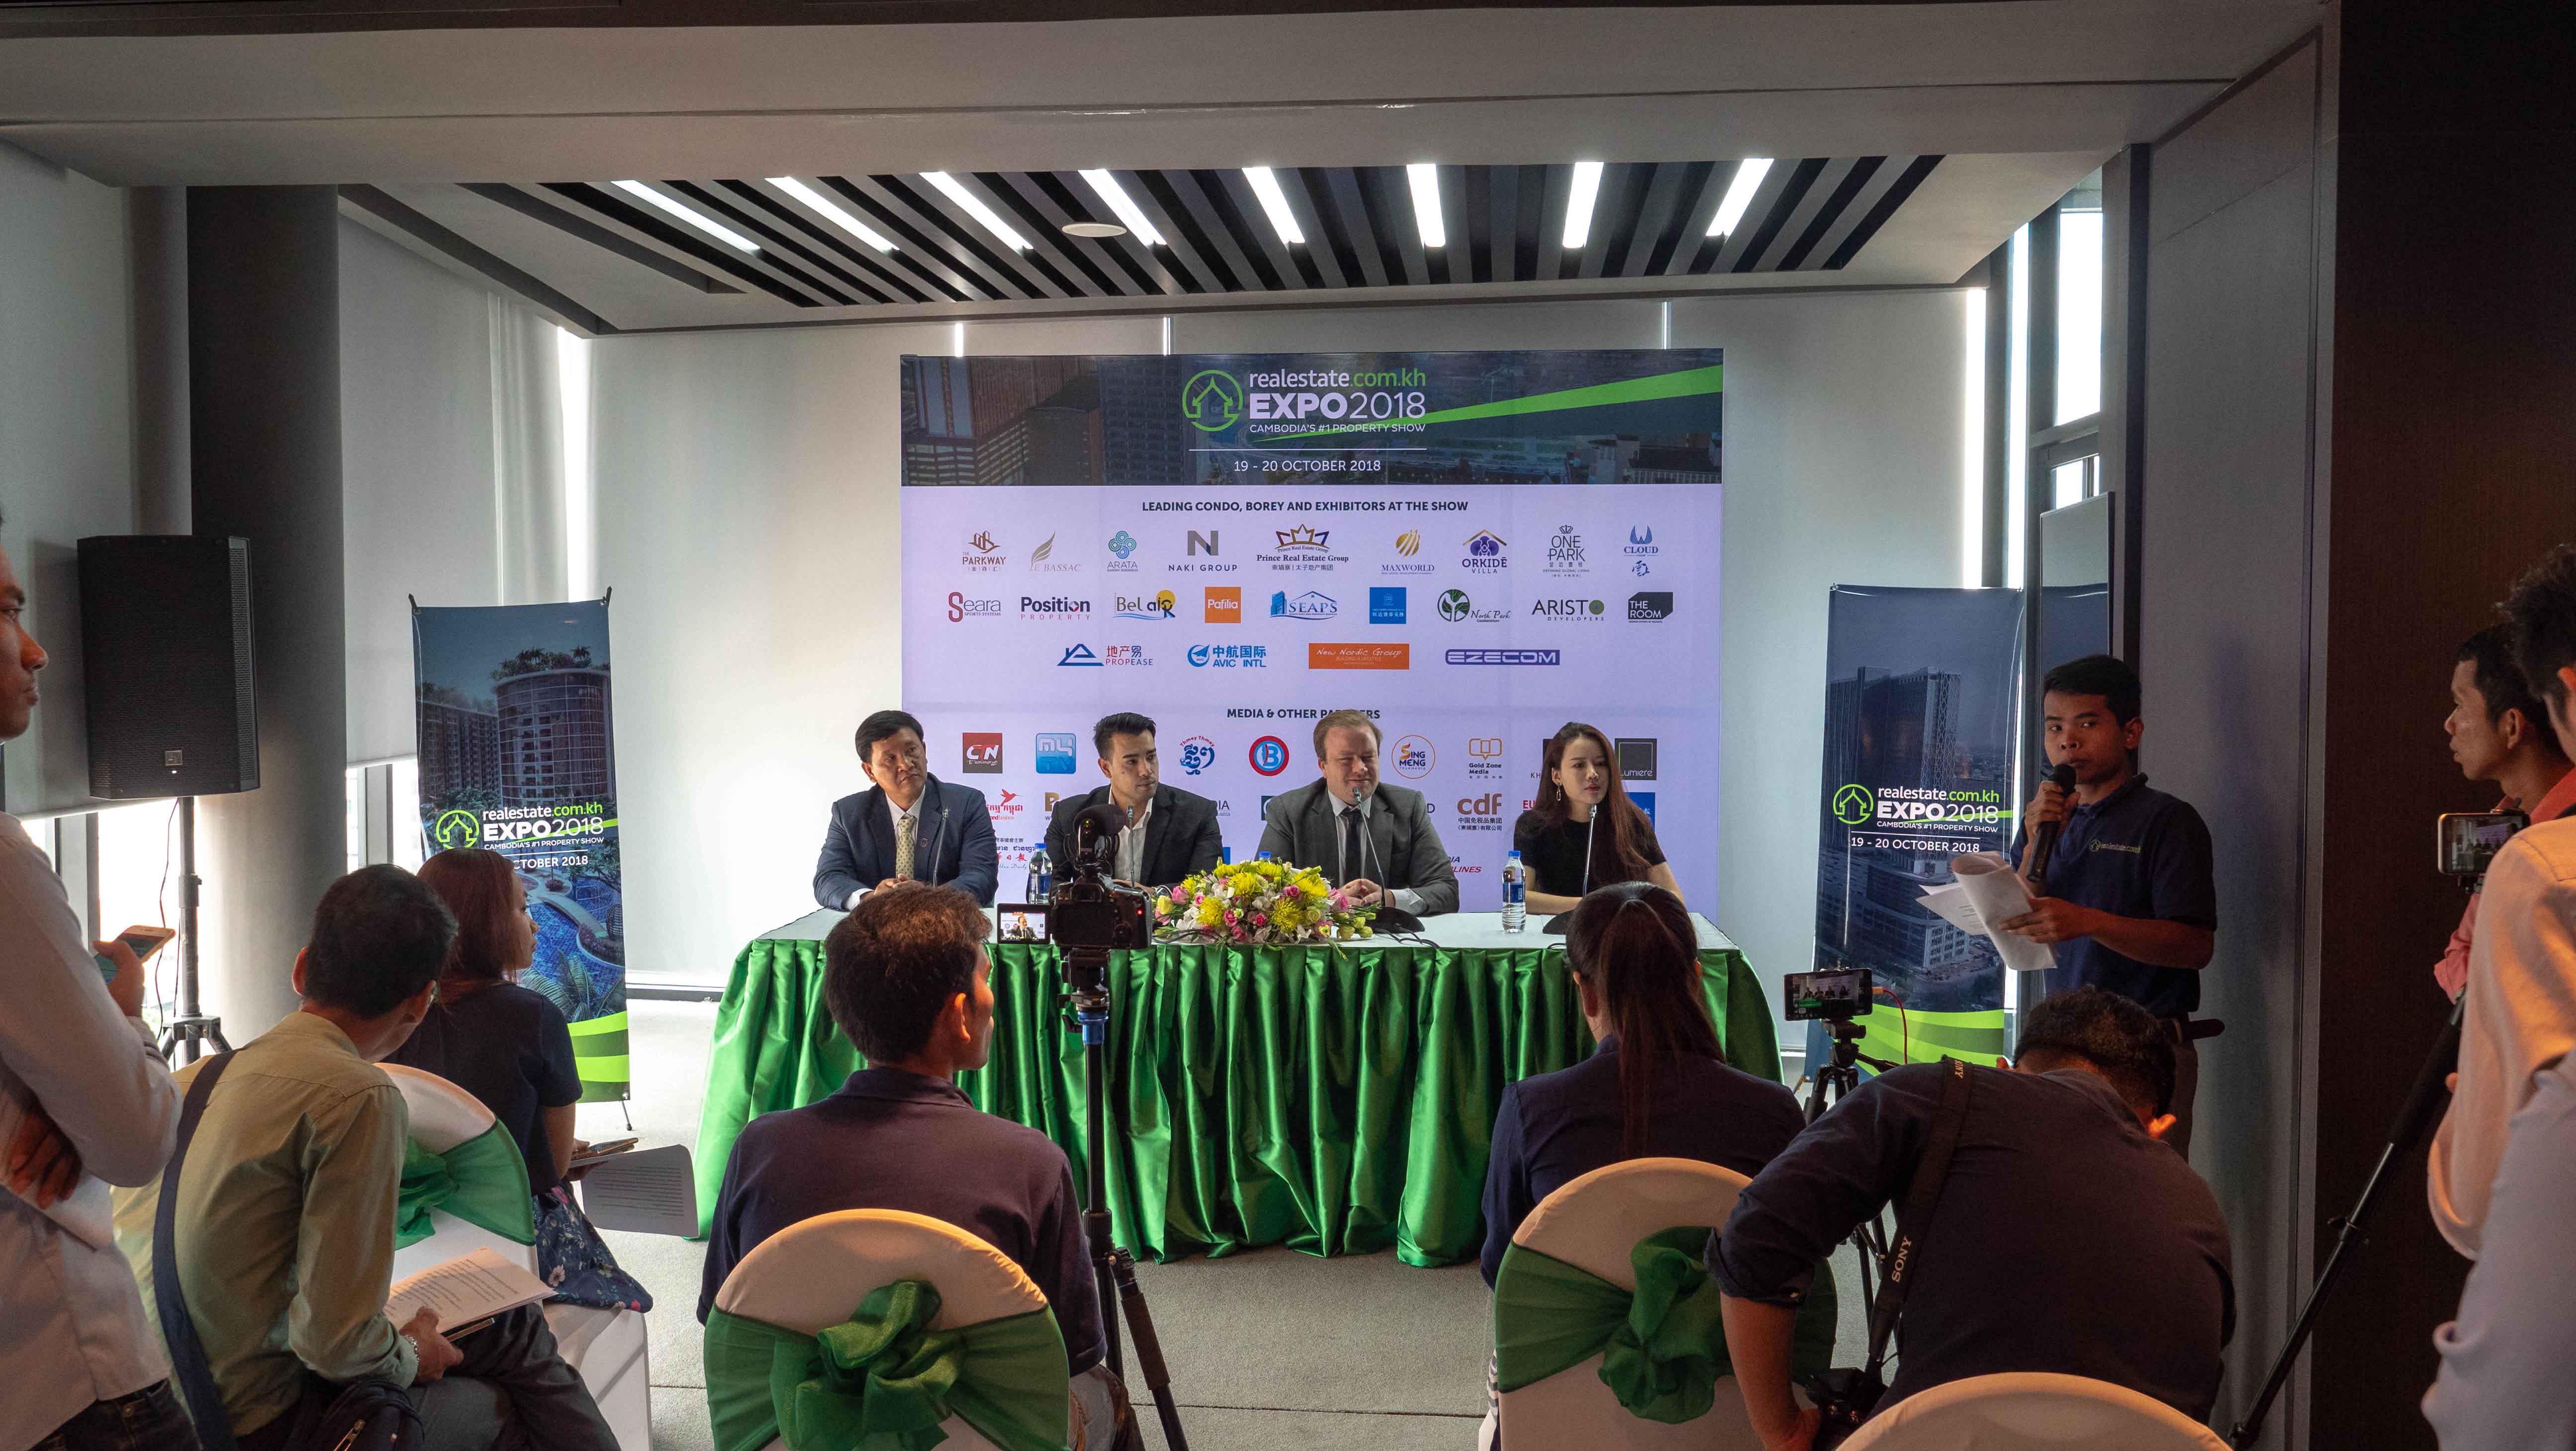 Official Launch of the Realestate.com.kh EXPO 2018, Cambodia’s #1 Property Expo. Returning this October 19-20th